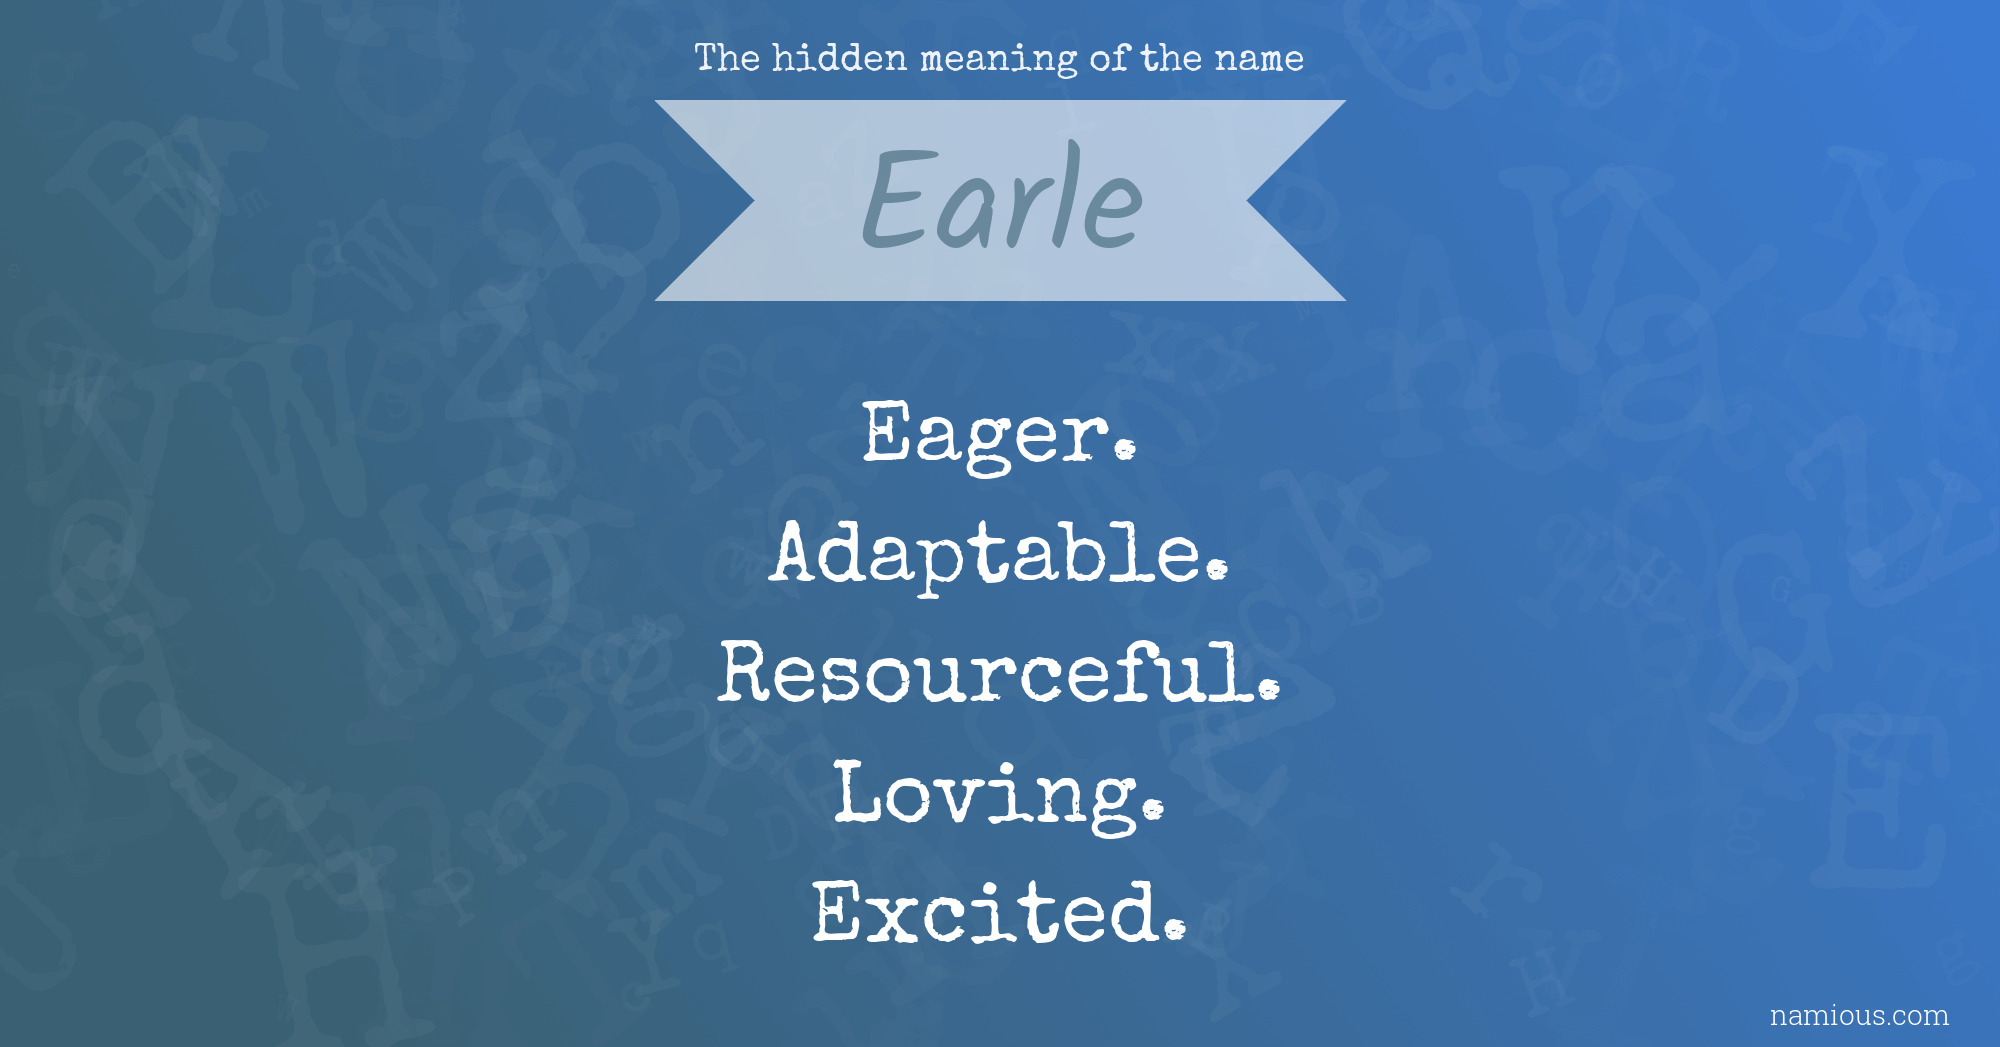 The hidden meaning of the name Earle